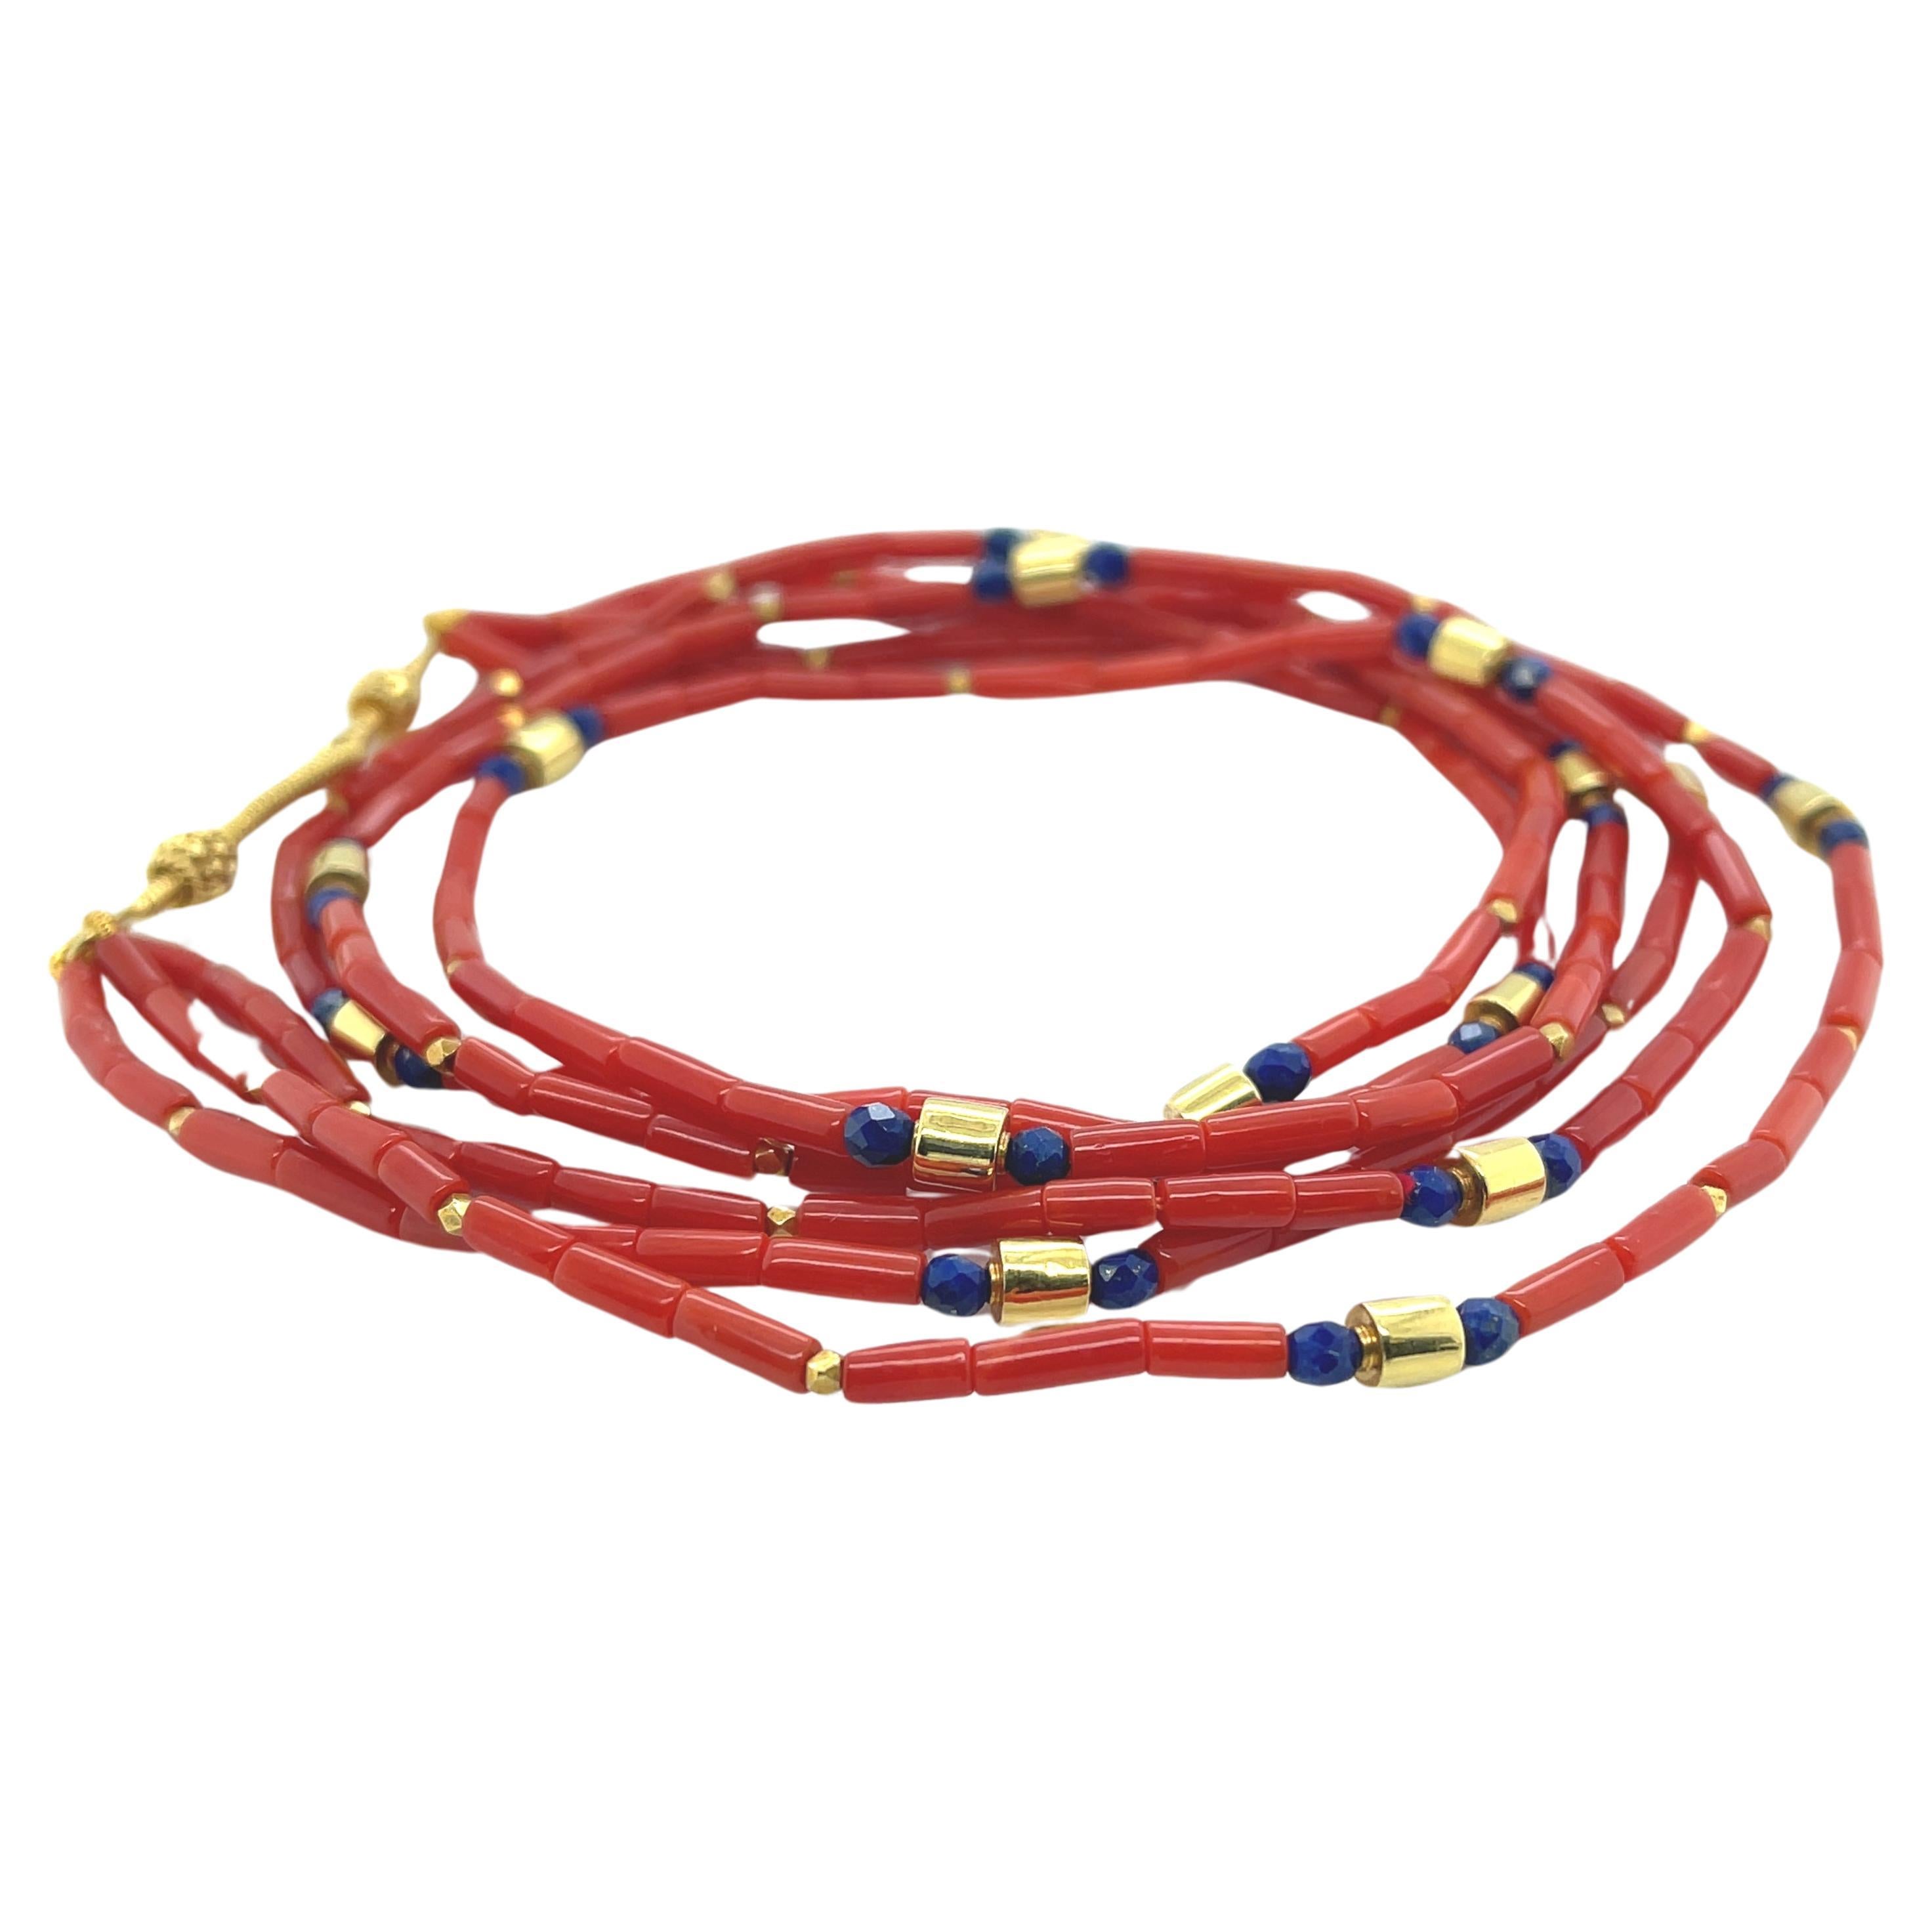 This natural color coral necklace features 3 strands red coral tube beads beautifully arranged with 18k yellow gold spacers and blue lapis accents.  The 5mm coral beads have deep red color that contrasts nicely with the royal blue lapis and bright